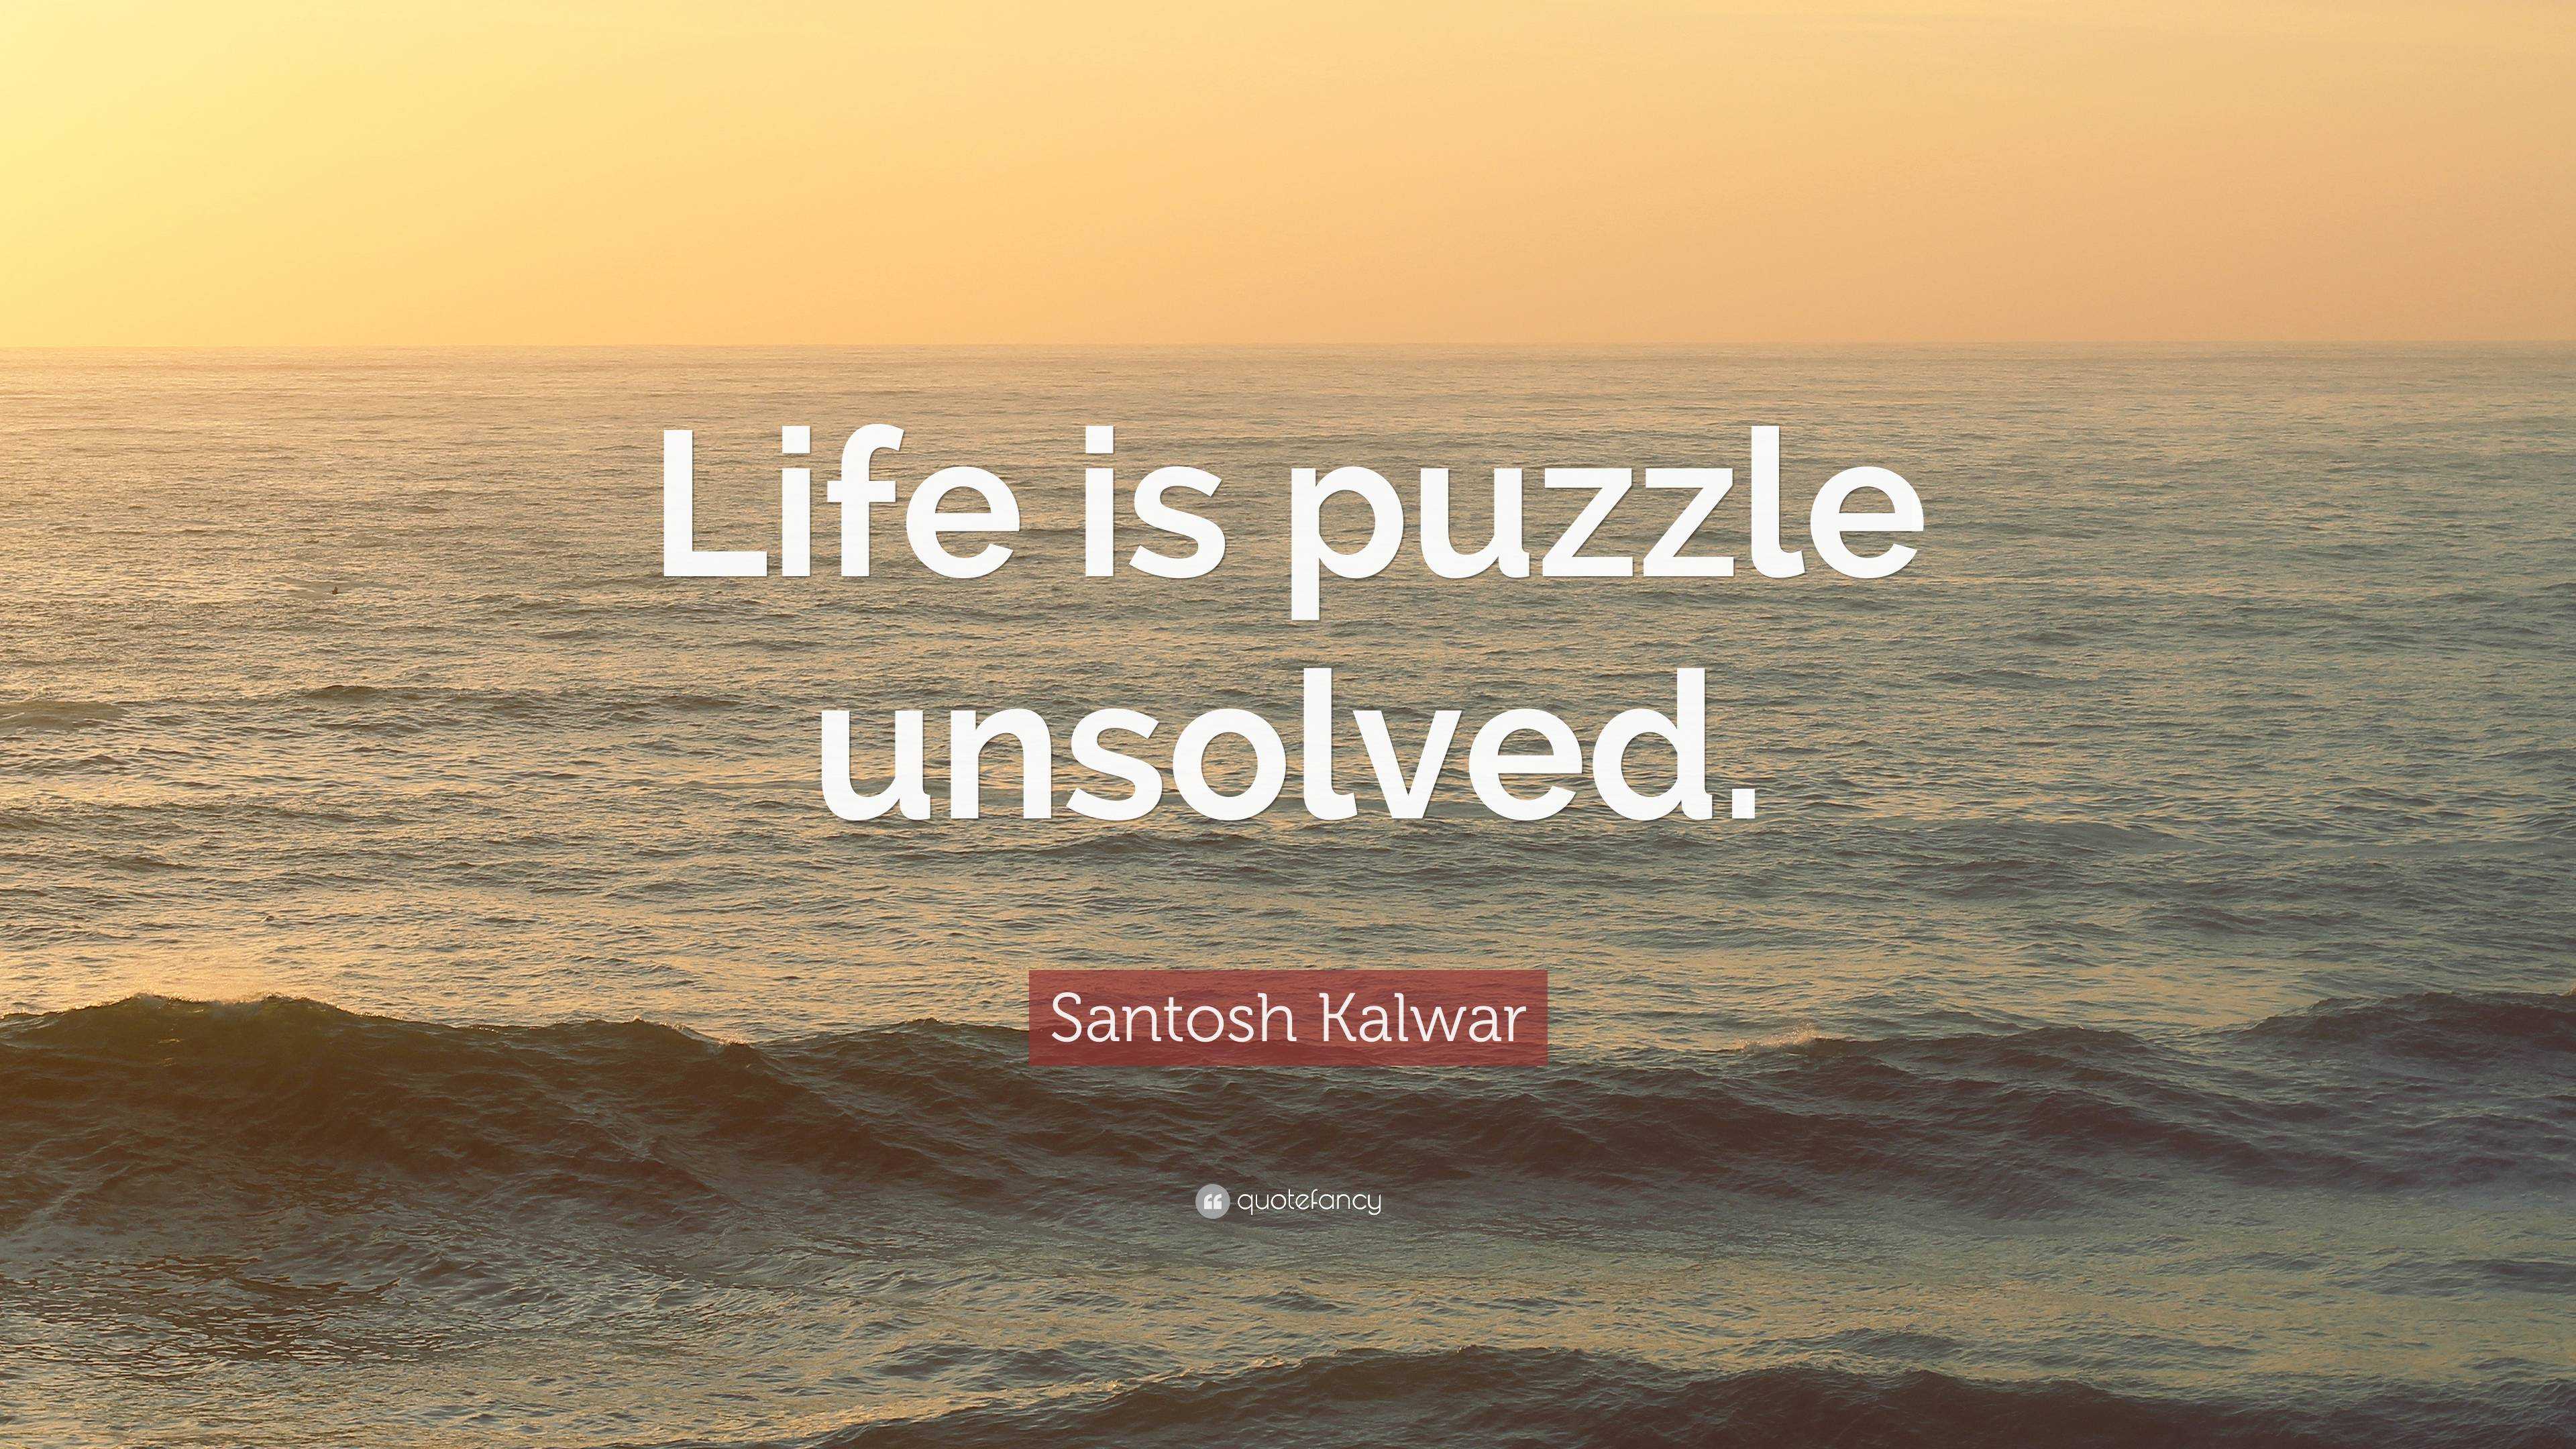 Santosh Kalwar Quote: “Life Is Puzzle Unsolved.”